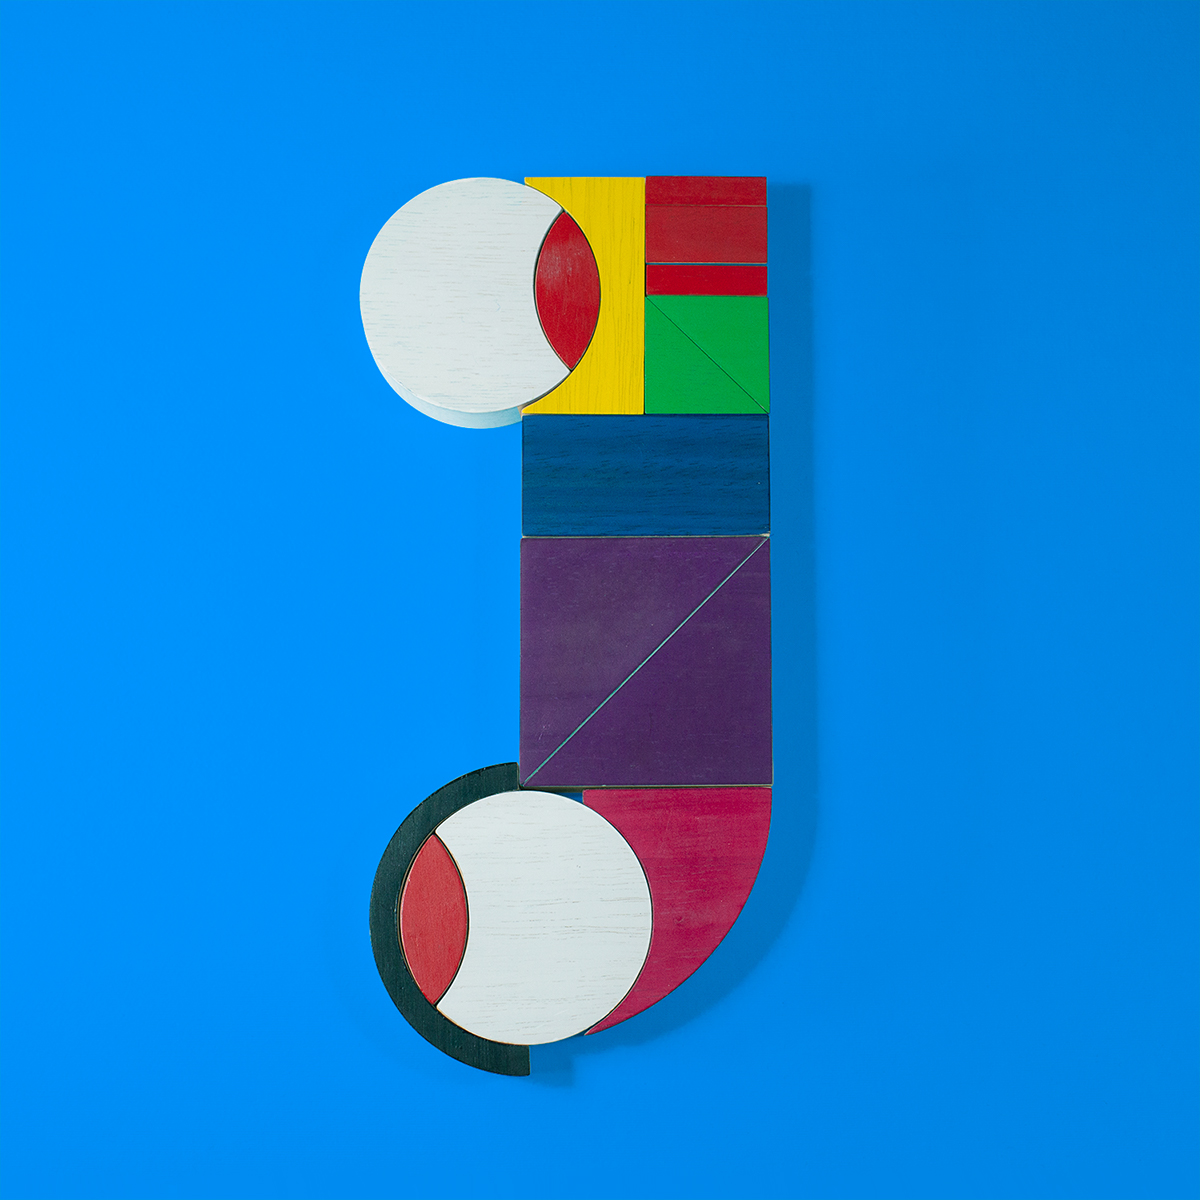 type 36daysoftype dosdecadatres tipografia wood lettering wooden geometric flat design Basic madrid numbers letters Playful